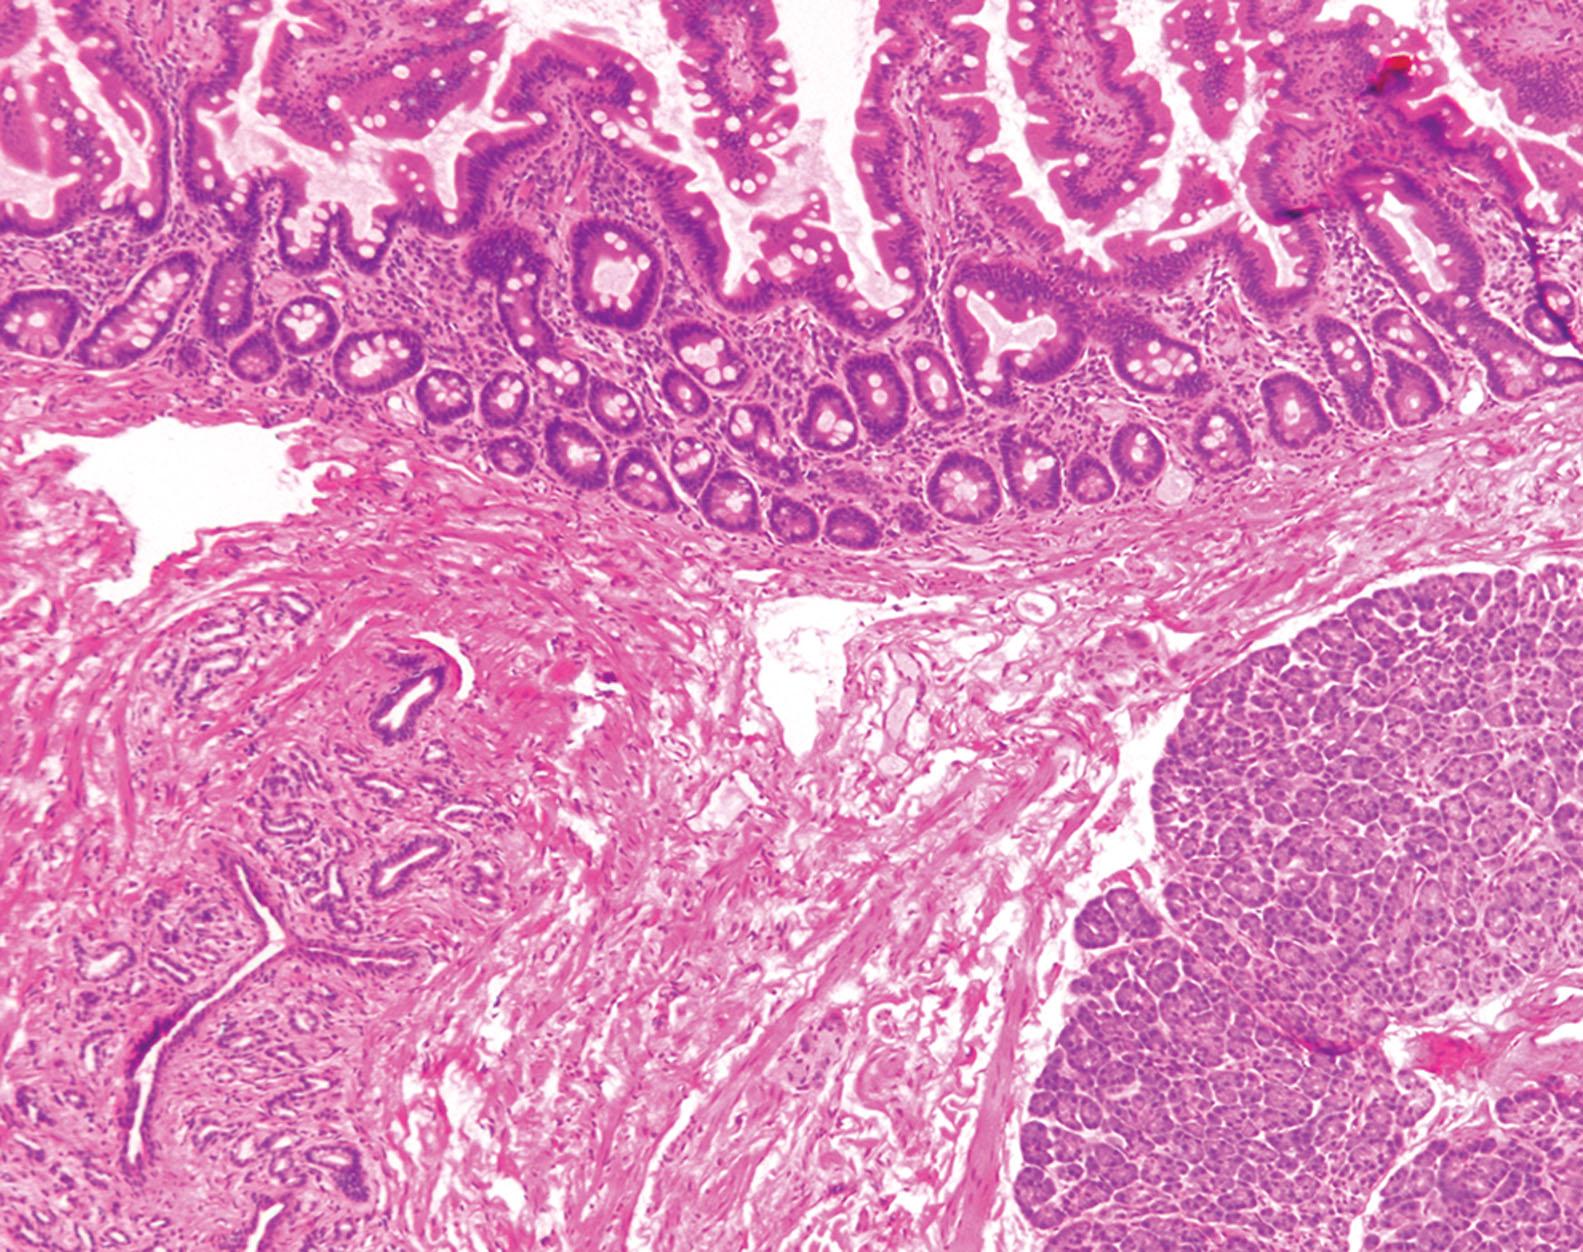 Figure 6.4, Pancreatic heterotopia: Lobules of ancreatic heterotopia consists of tightly packed pancreatic acini (bottom right) associated with pancreatic ducts (bottom left) located in the duodenum. In this image, the pancreatic heterotopia involves the duodenal submucosa, but it can involve any layer of the bowel wall.